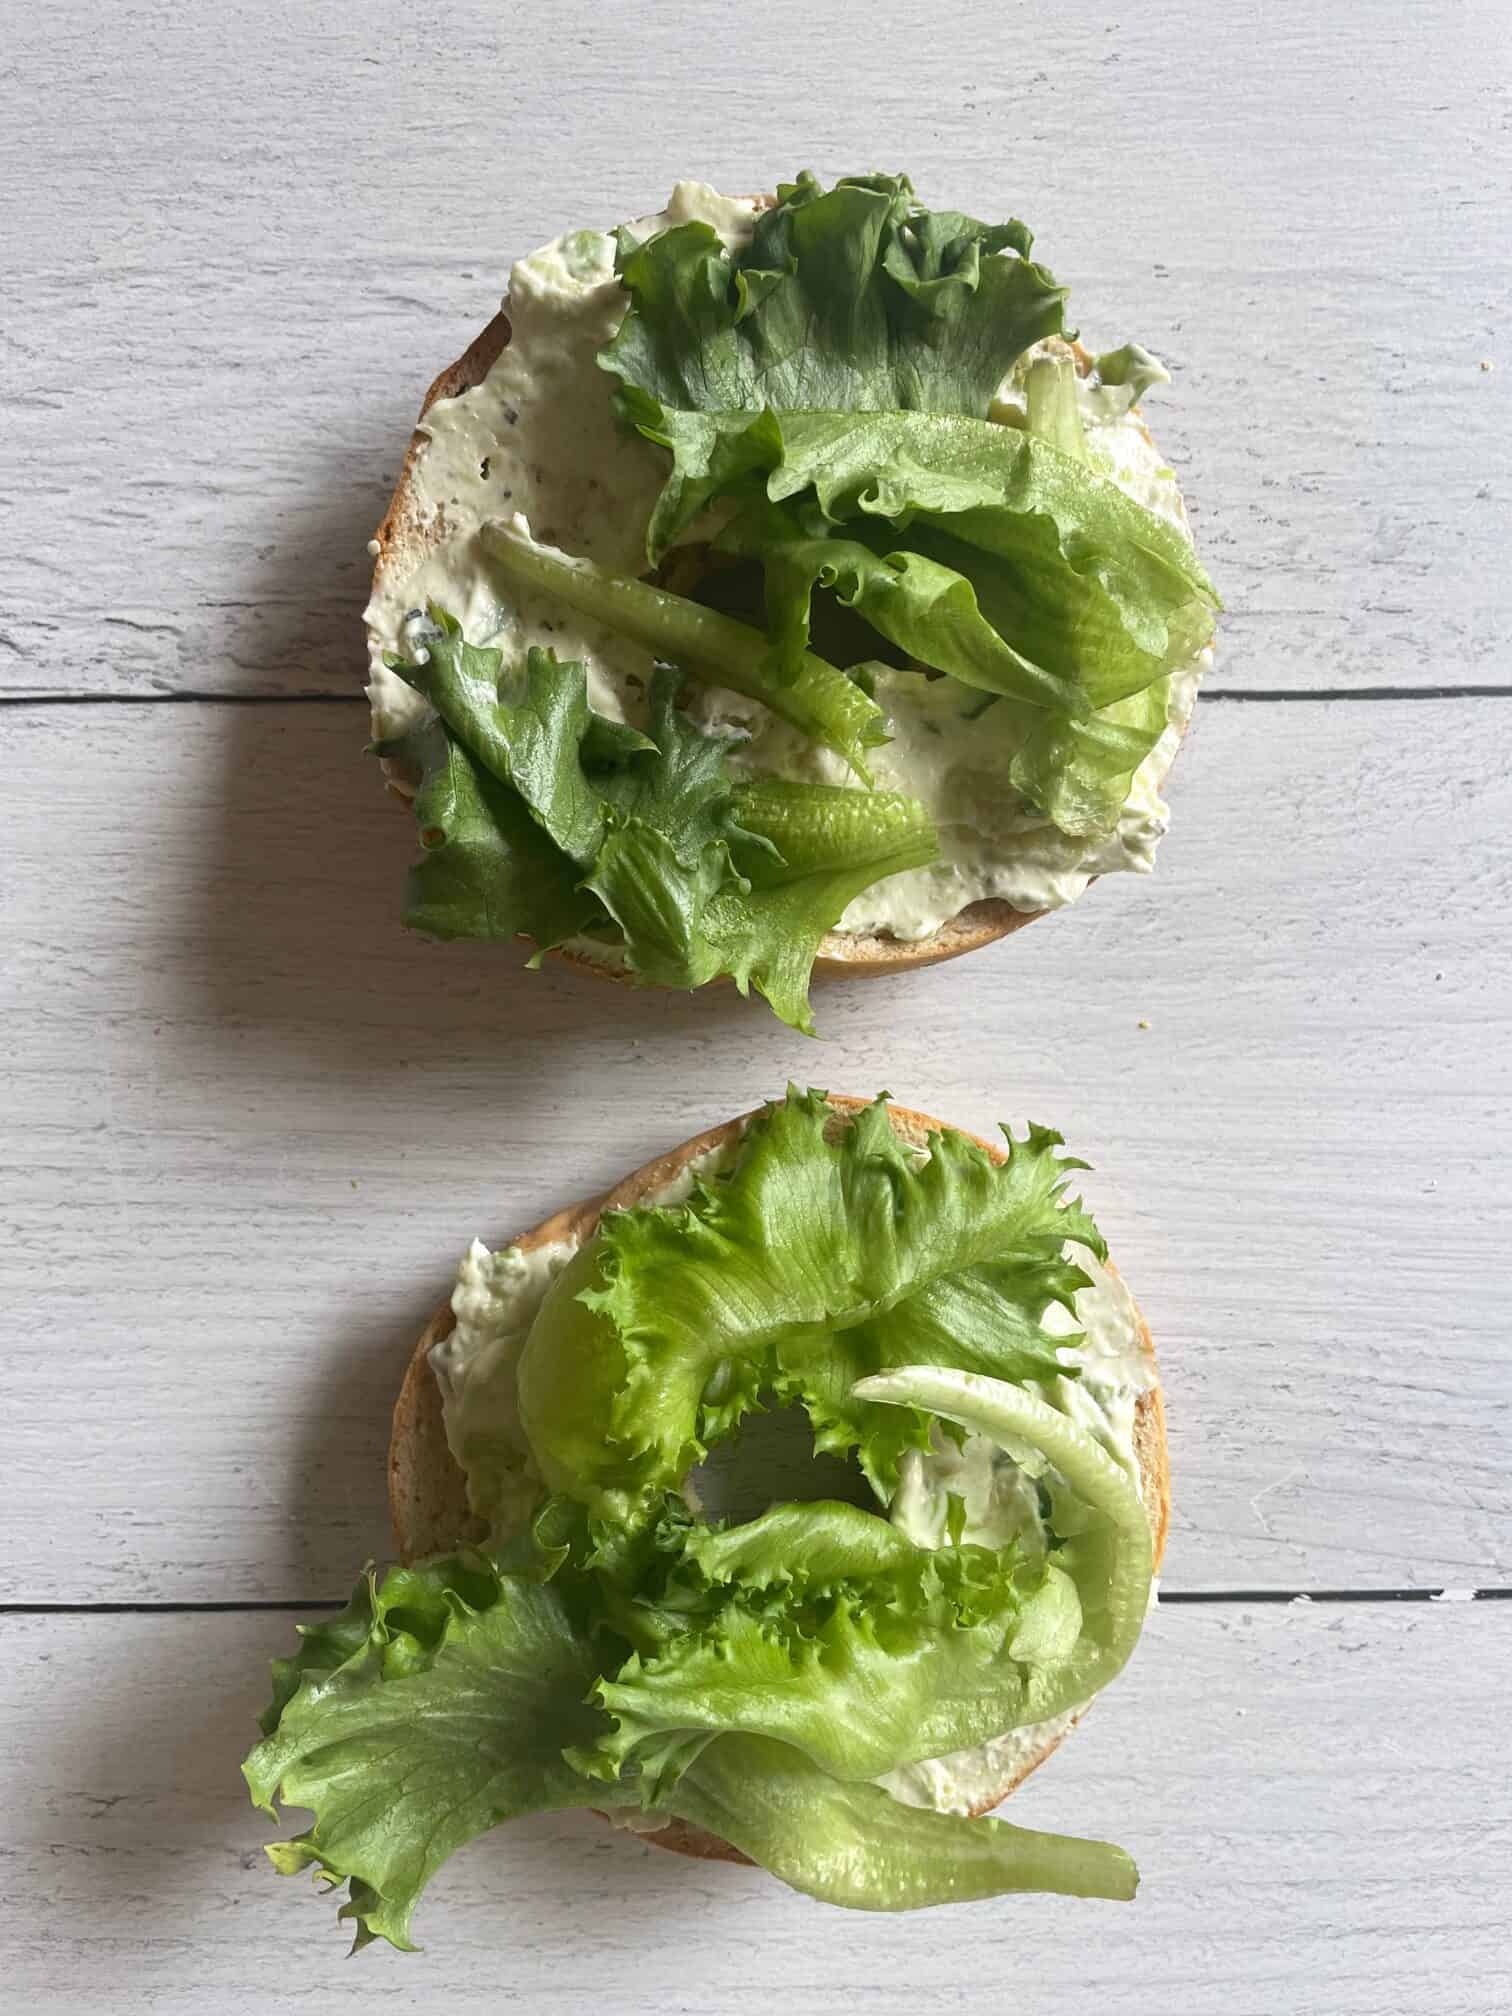 Bagel with cream cheese and lettuce.